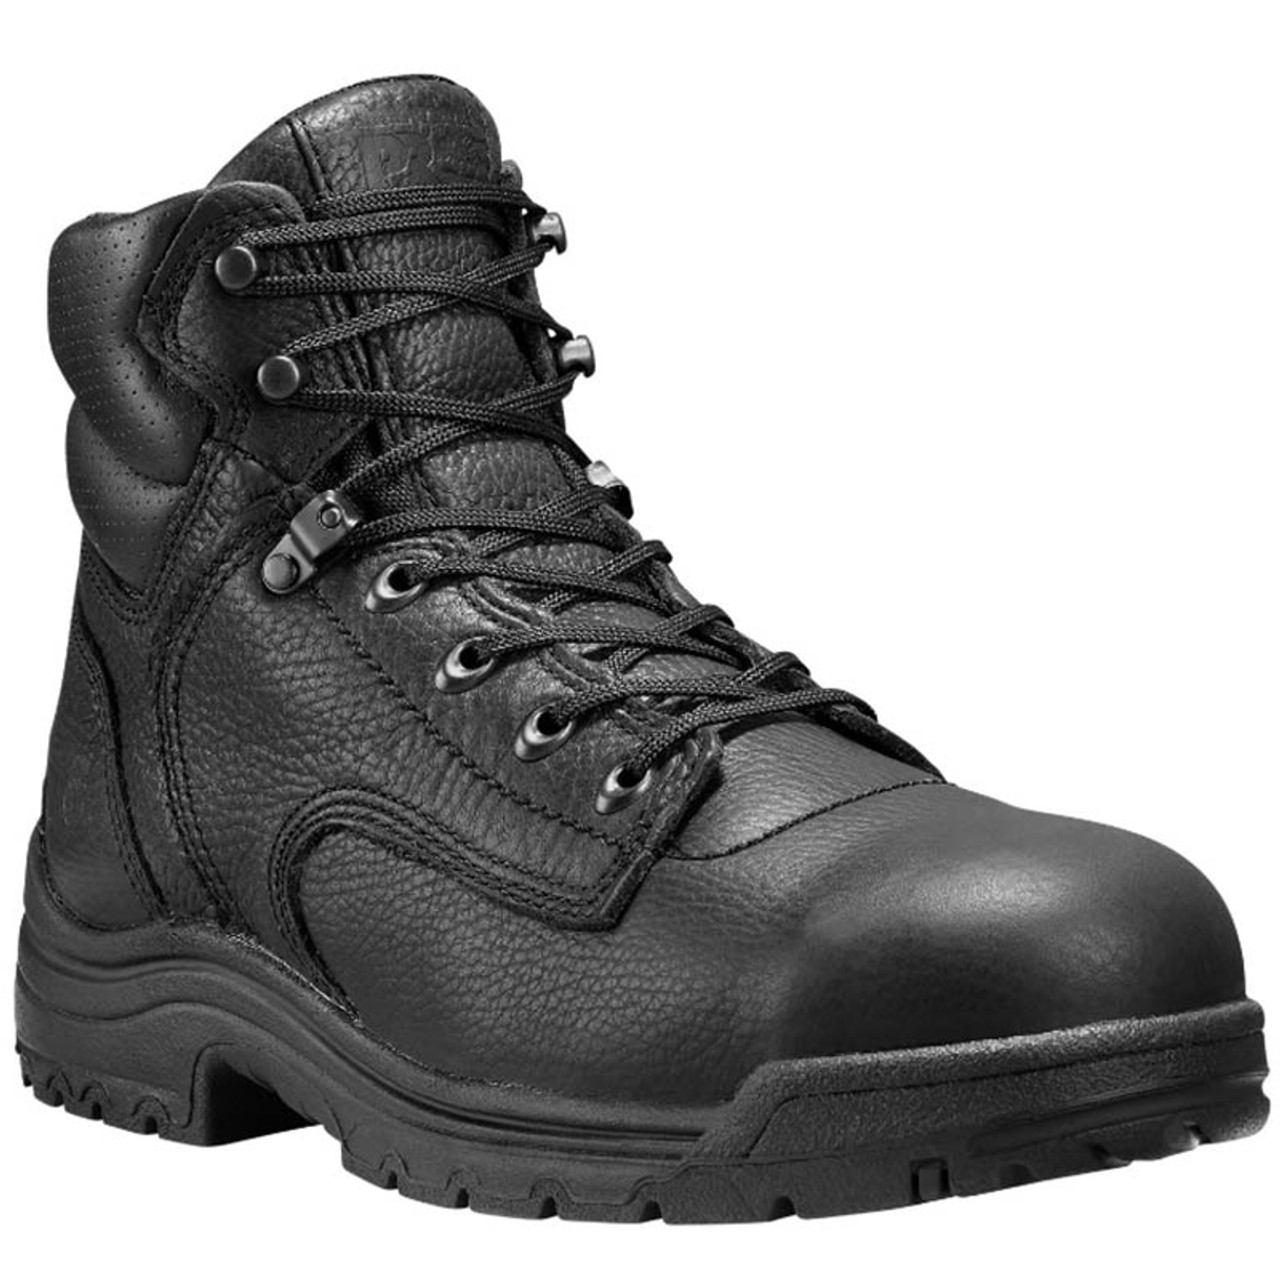 timberland pro series work boots